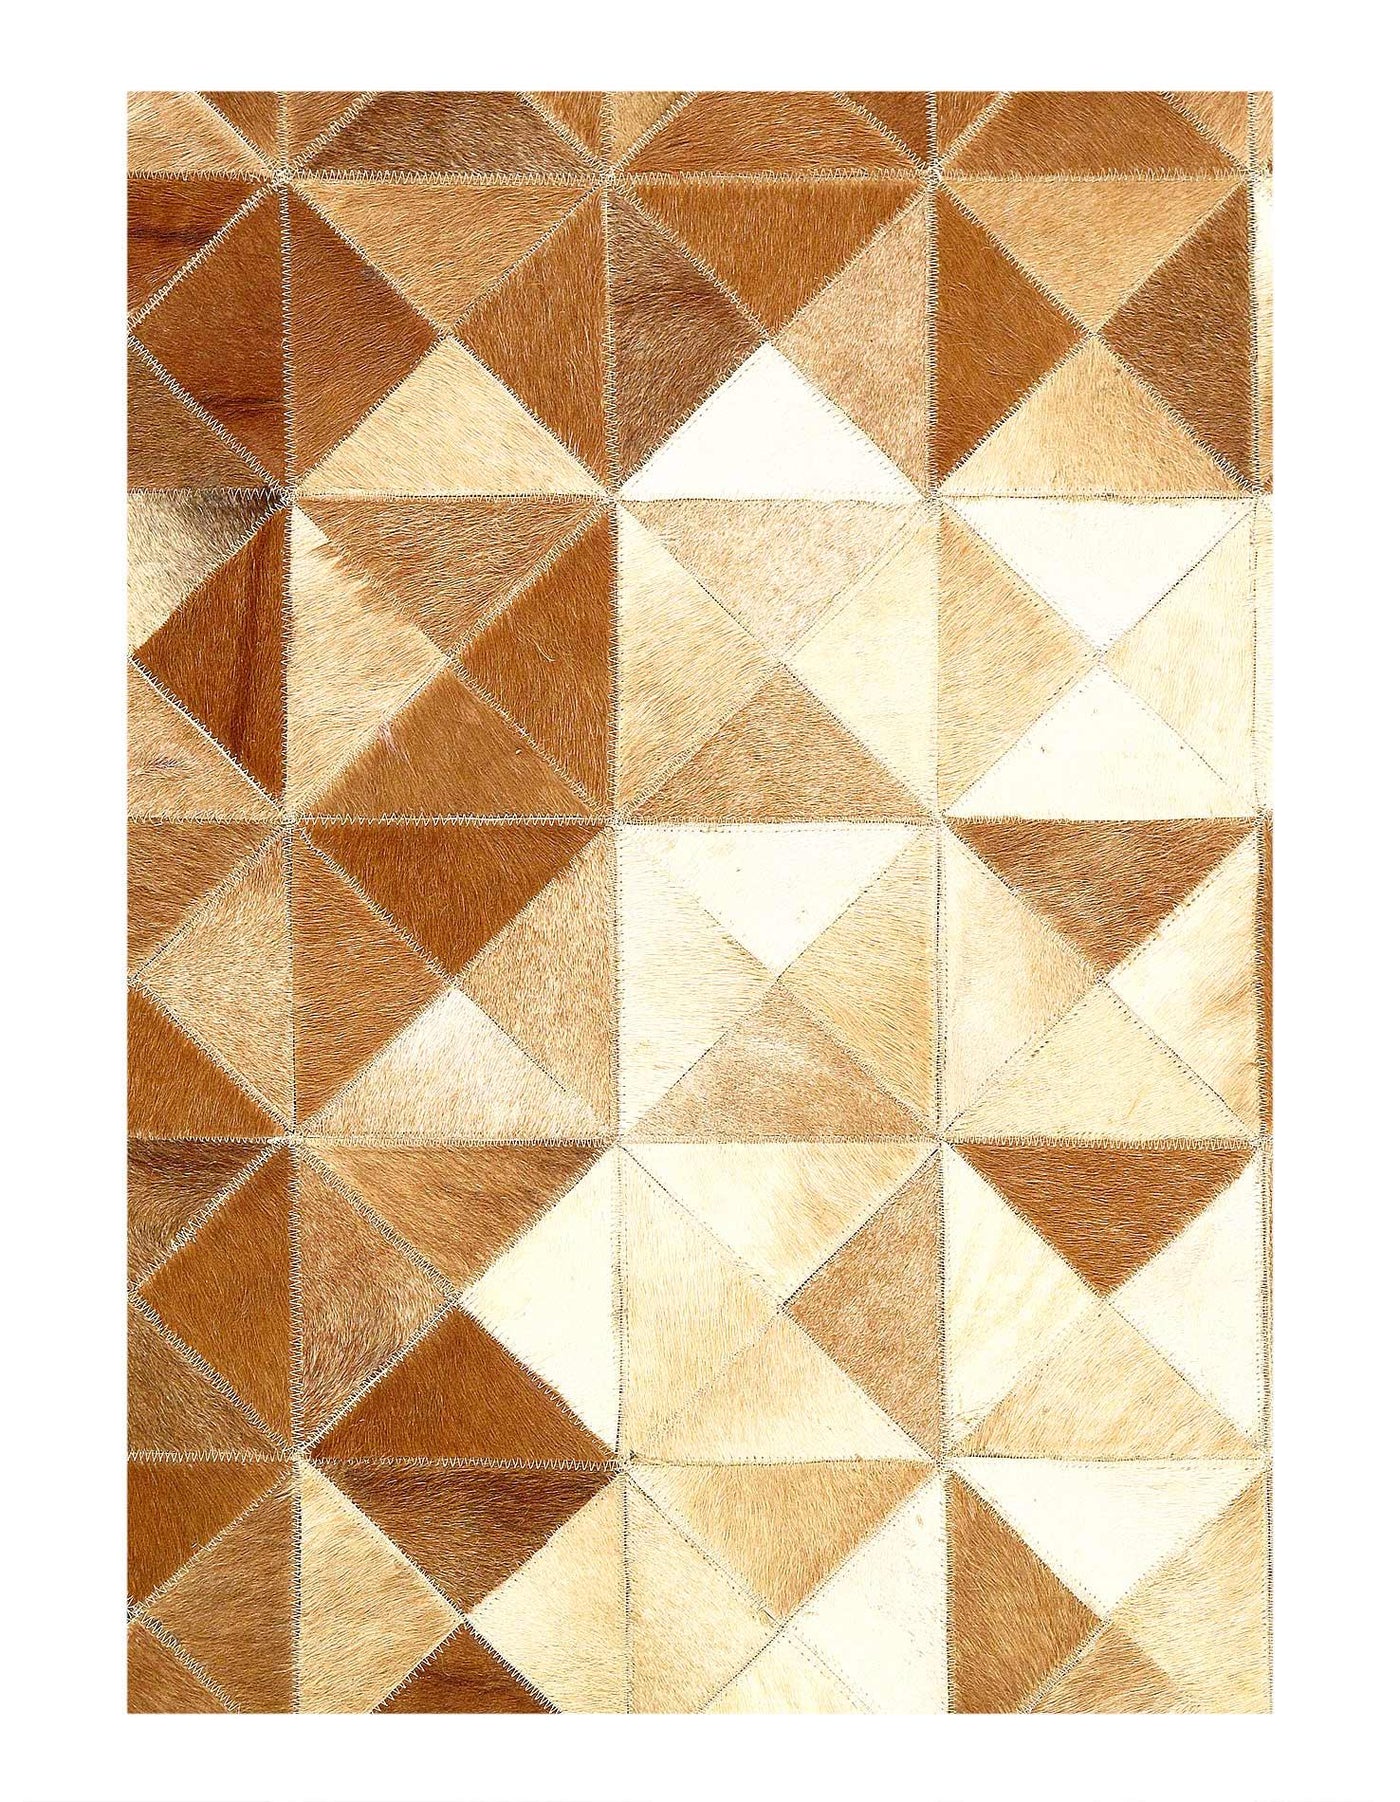 Canvello Handmade Studio Leather Natural Hide Leather Rug - 4' X 6'